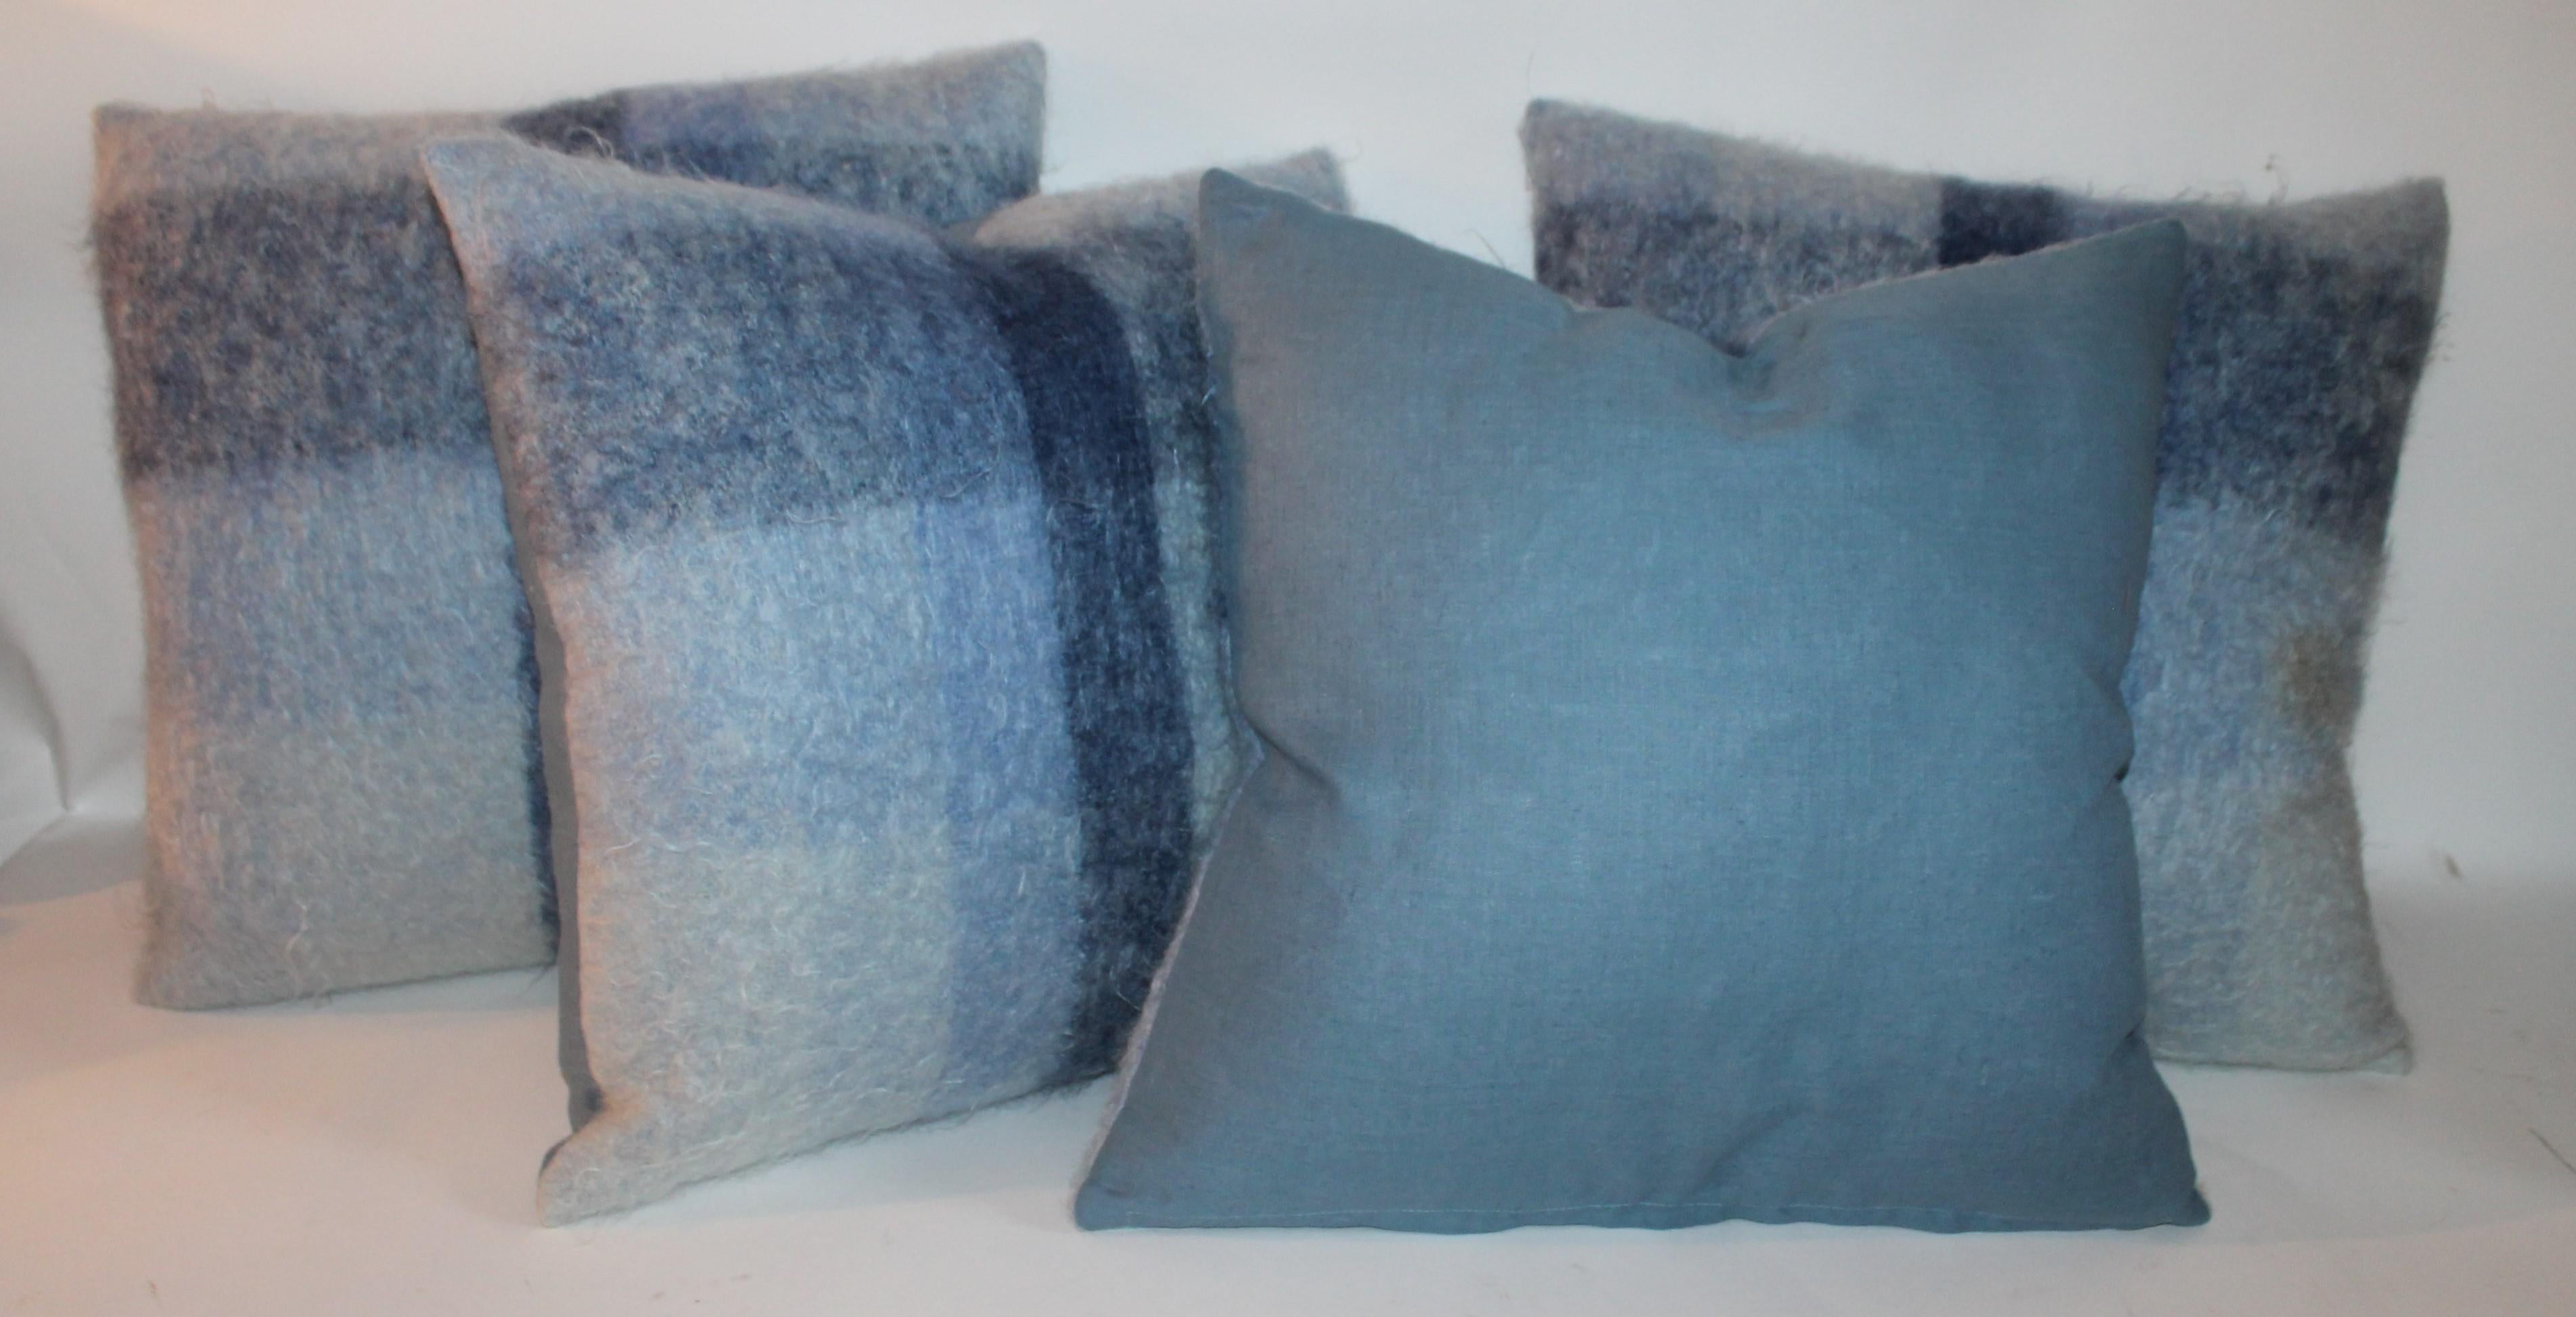 Mohair Pillows in Blues from Vintage Blanket, Pair 4